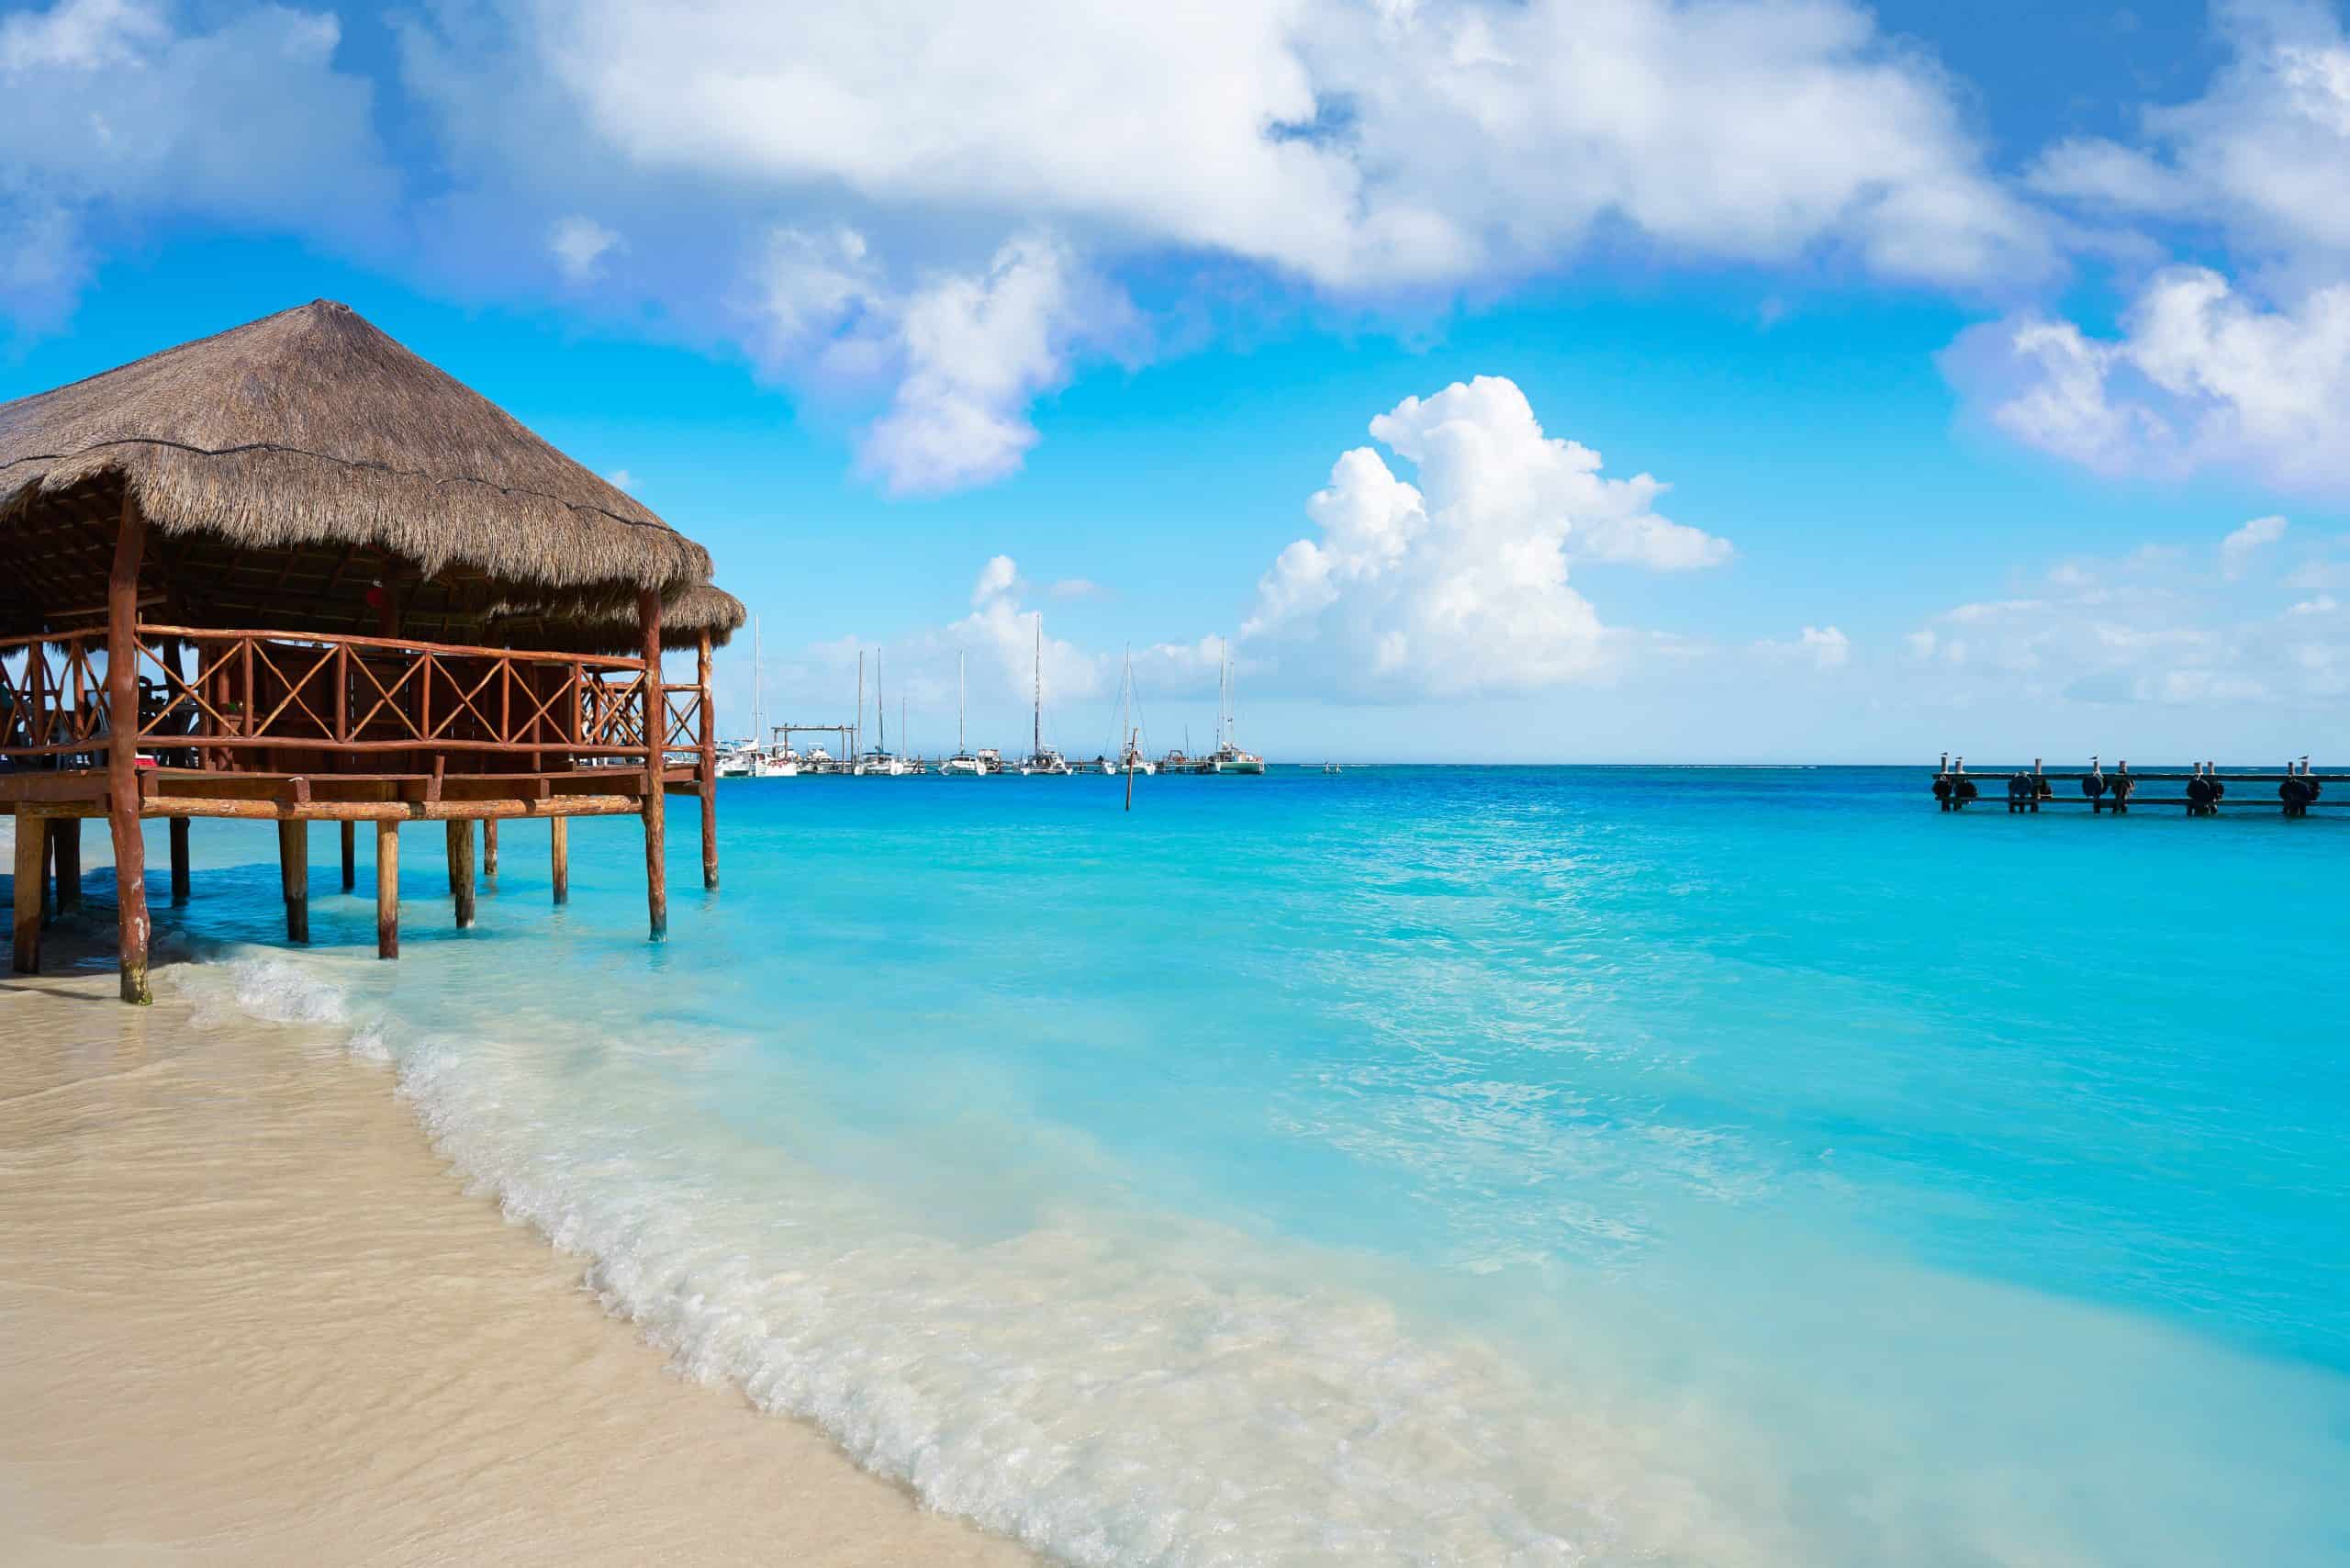 <ul> <li><strong>Where:</strong> Playa Maroma, Mexico</li> </ul> <p>If Secrets Maroma Beach Riviera Cancun isn't already on your radar as a traveler, it should be. It's an adults-only all-inclusive resort that's perfect for people over the age of 18. Folks who don't want to run into any crying children while they're trying to relax on vacation understand the allure.</p> <p>The property has a private beach that guests can lounge on with breathtaking views of the horizon. Bicycle tours, snorkeling, and tennis are a few of the brilliant activities to try at this awesome destination. The restaurant on-site has a long list of delicious menu items to try as well.</p>